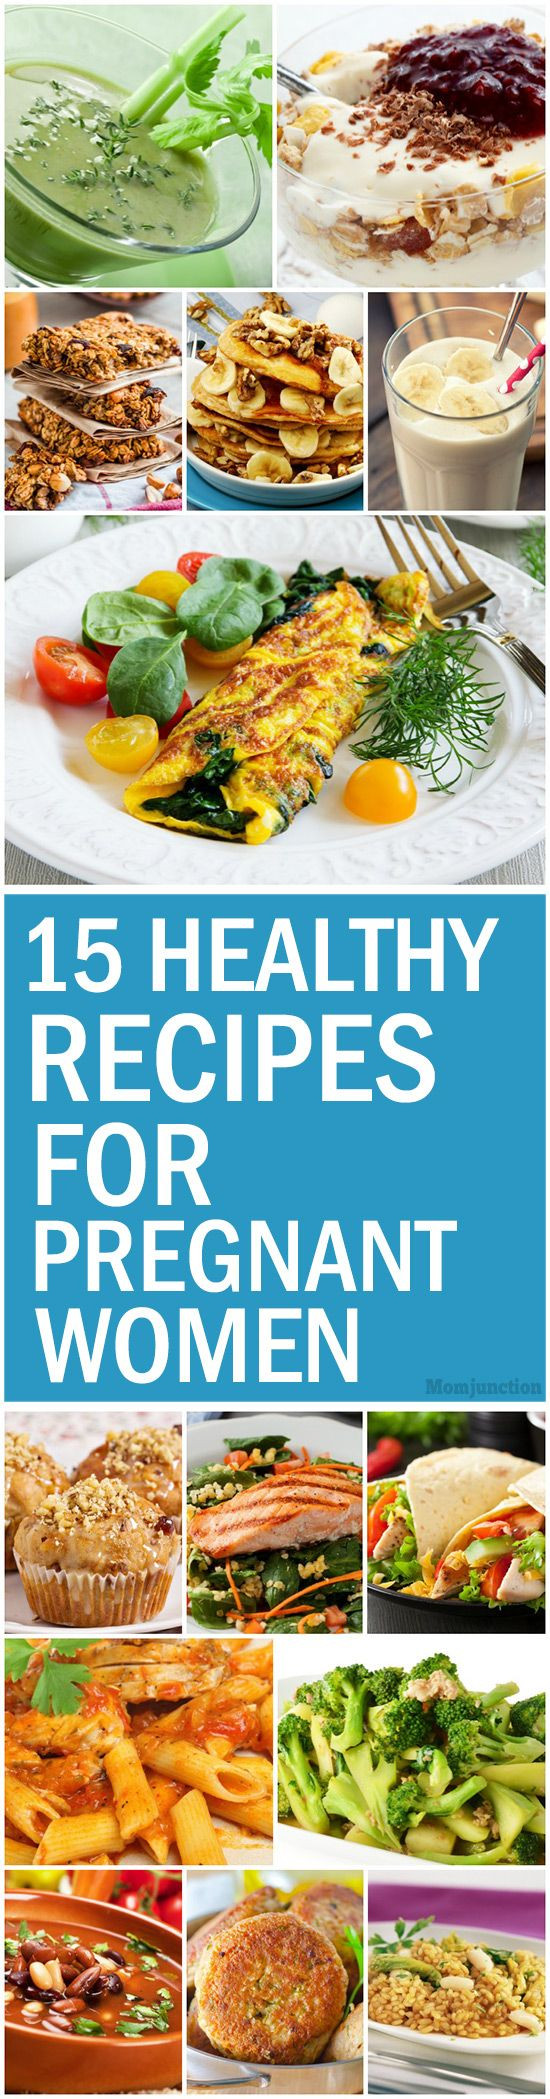 Healthy Pregnancy Dinner Recipes
 Top 15 Healthy Recipes For Pregnant Women